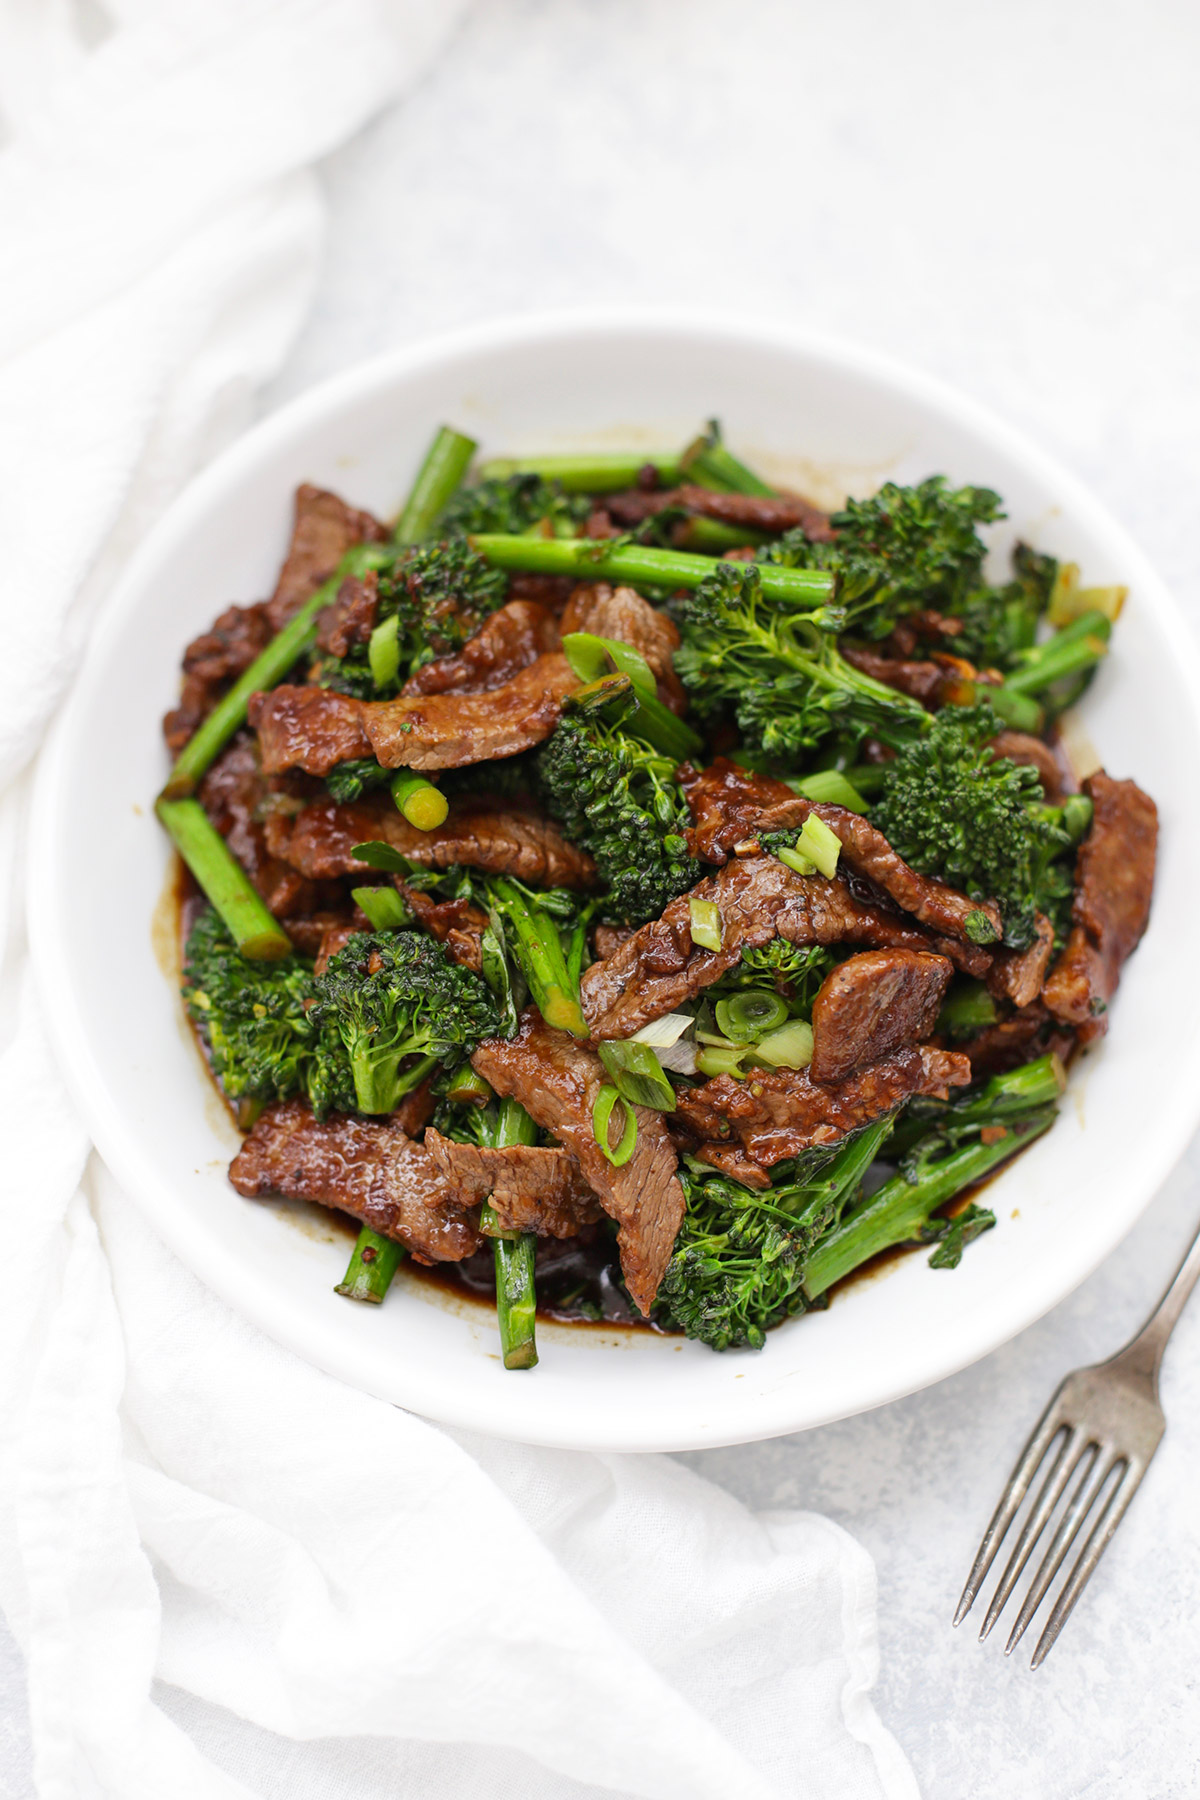 Healthy Beef and Broccoli from One Lovely Life